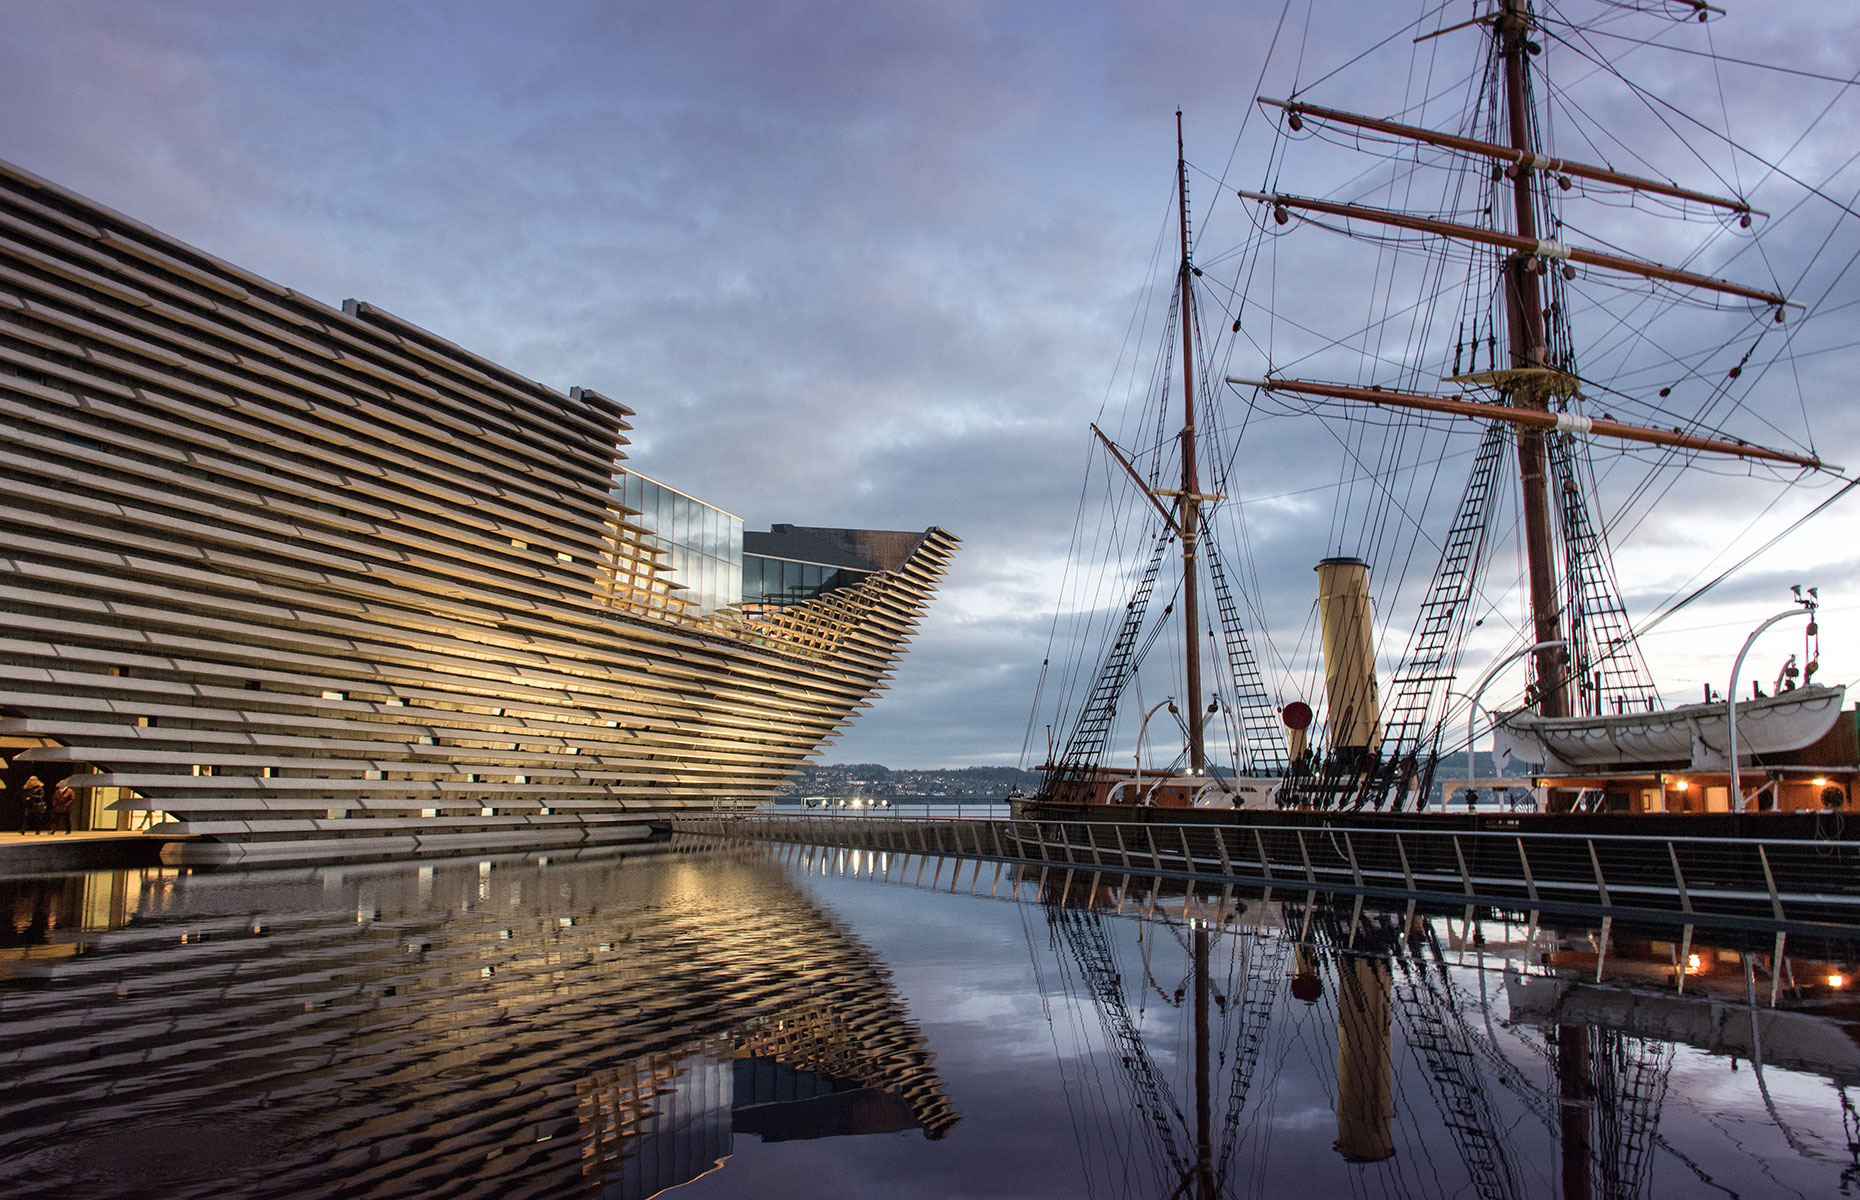 Dundee's waterfront with the RRS Discovery and the V&A Dundee museum (Image: Robin MacGregor/Shutterstock)